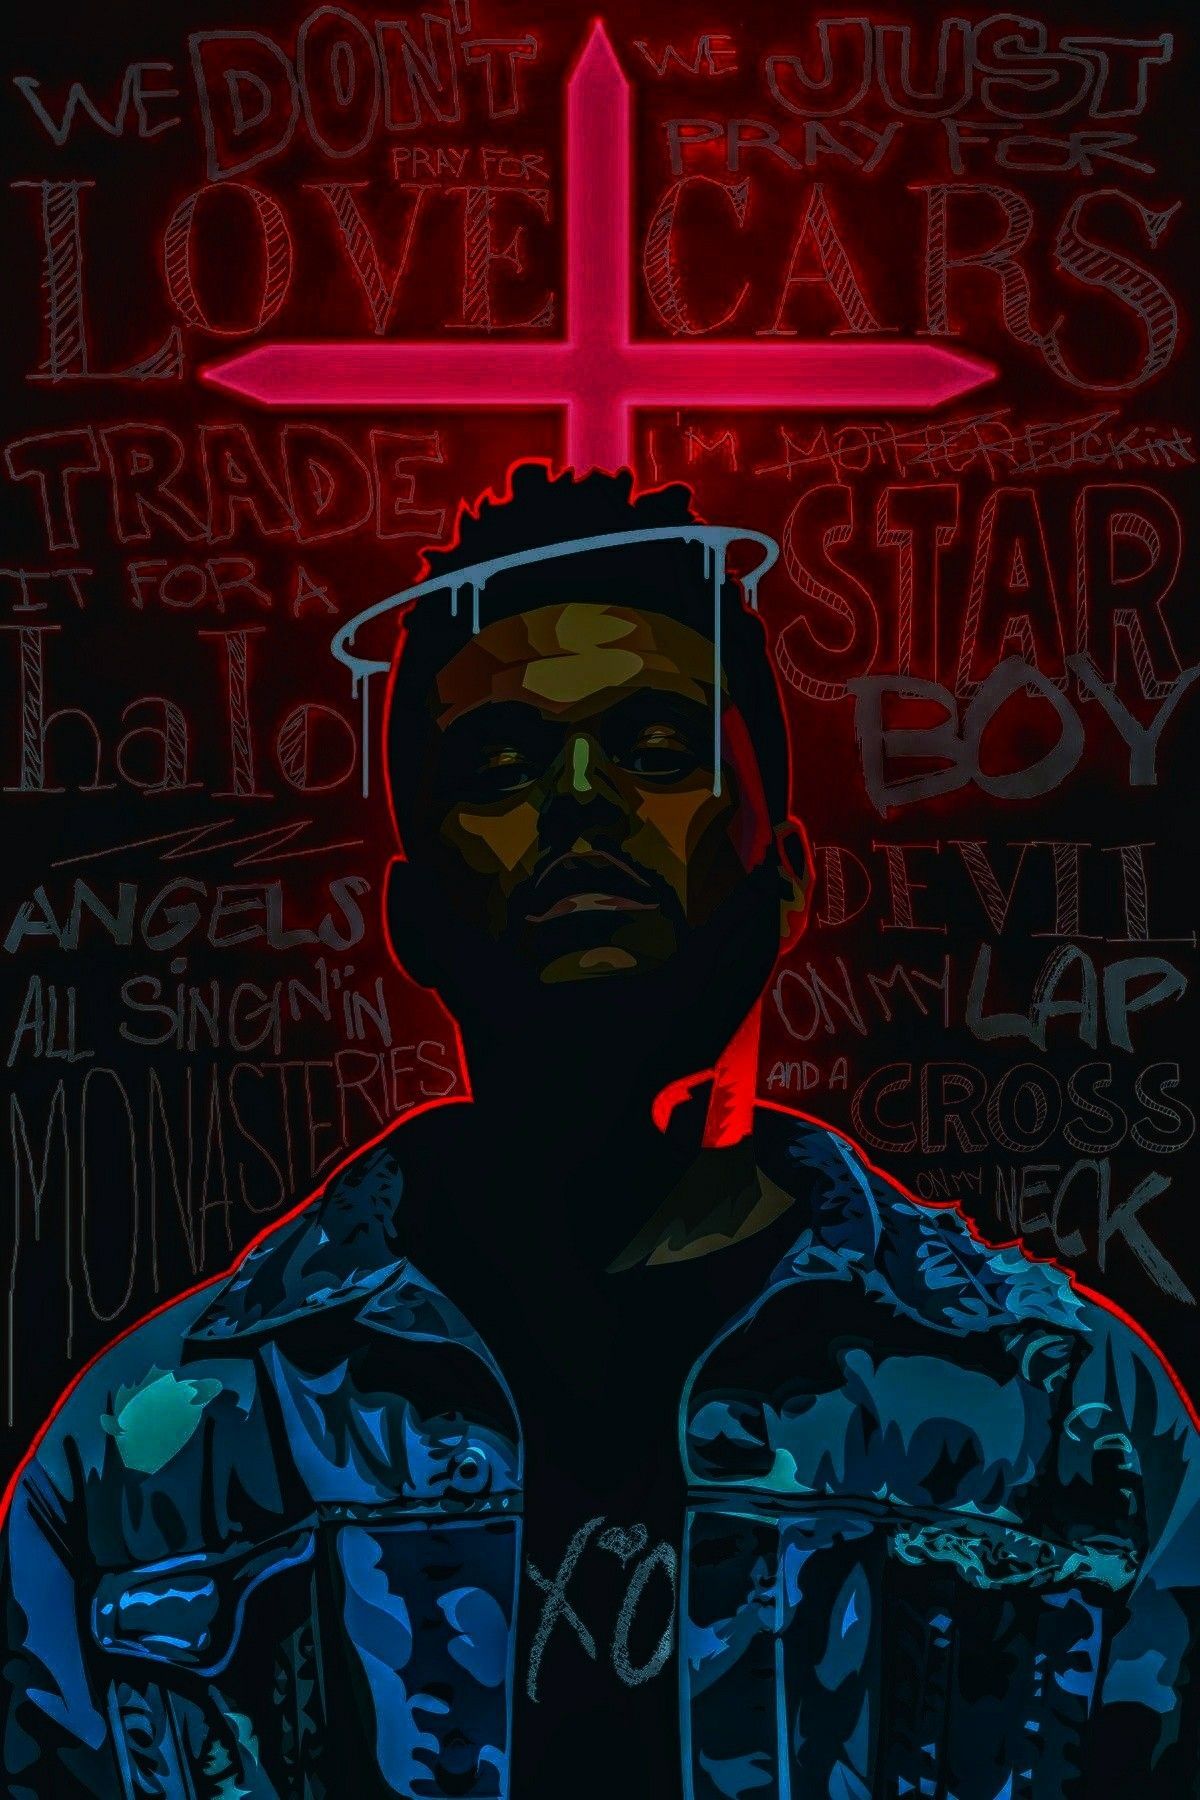 Starboy Wallpaper I made Comment your thoughts  rTheWeeknd